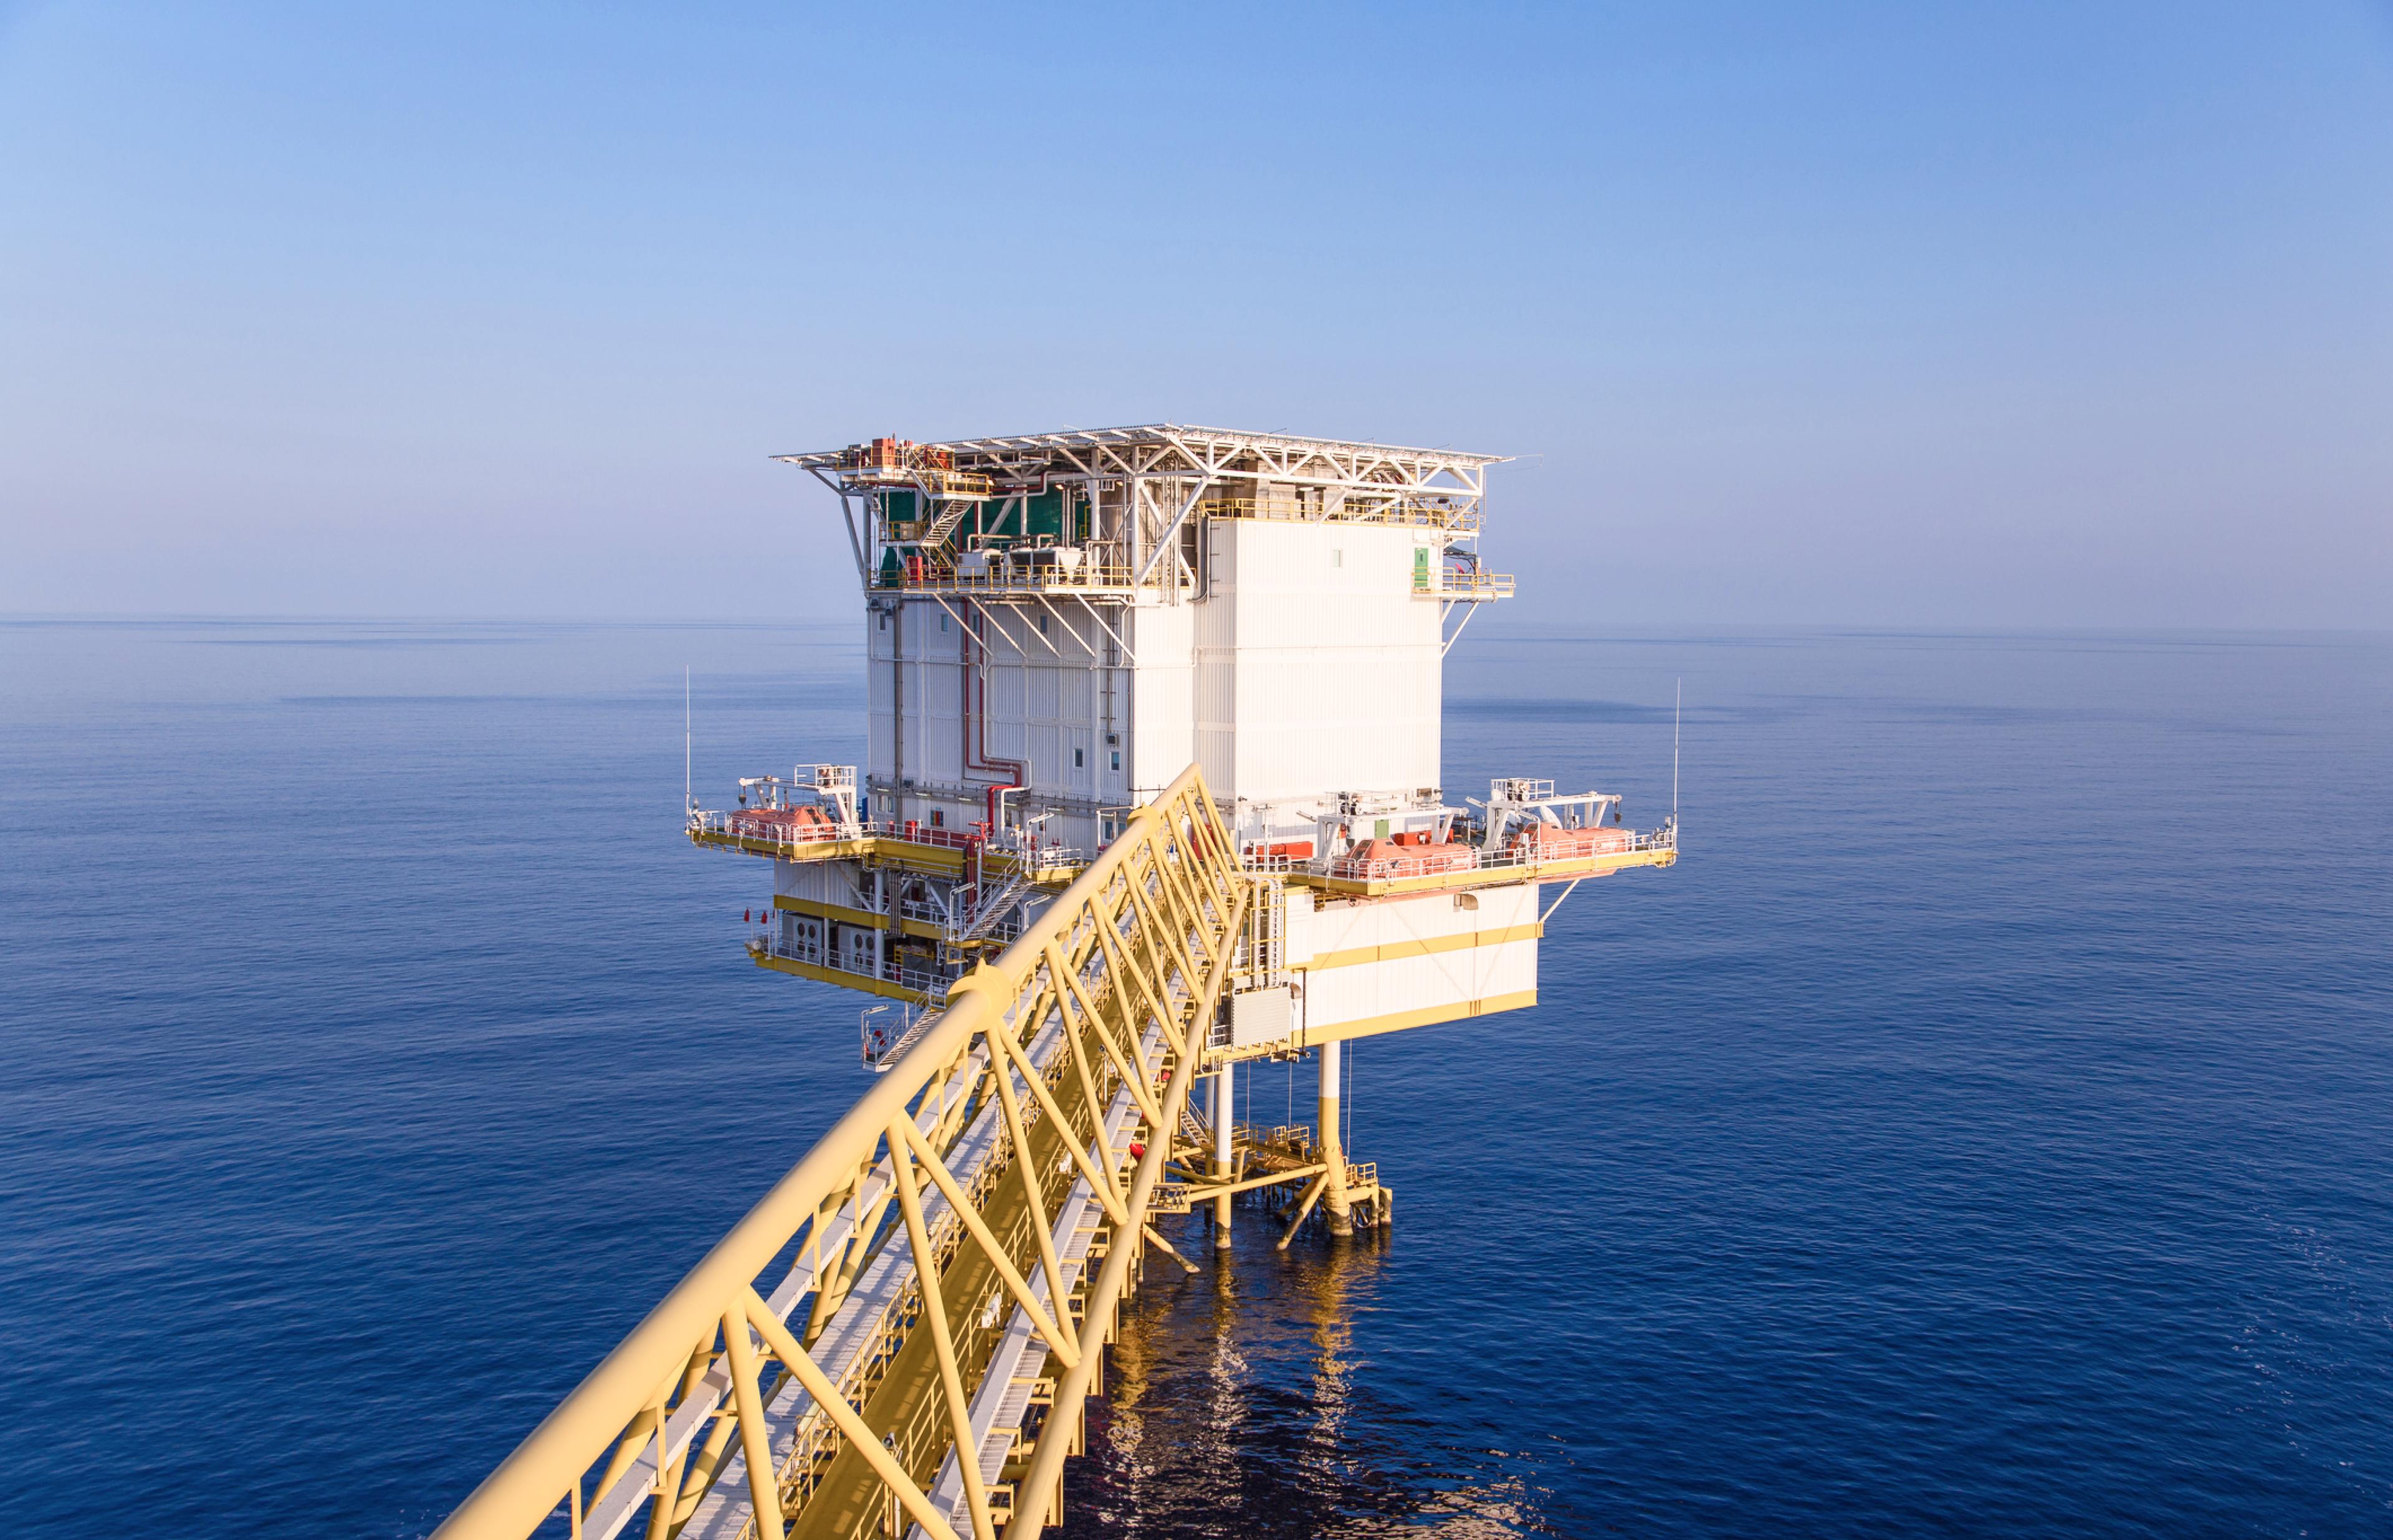 Offshore oil and gas accommodation platform in the gulf which is the central facility of oil rig workers